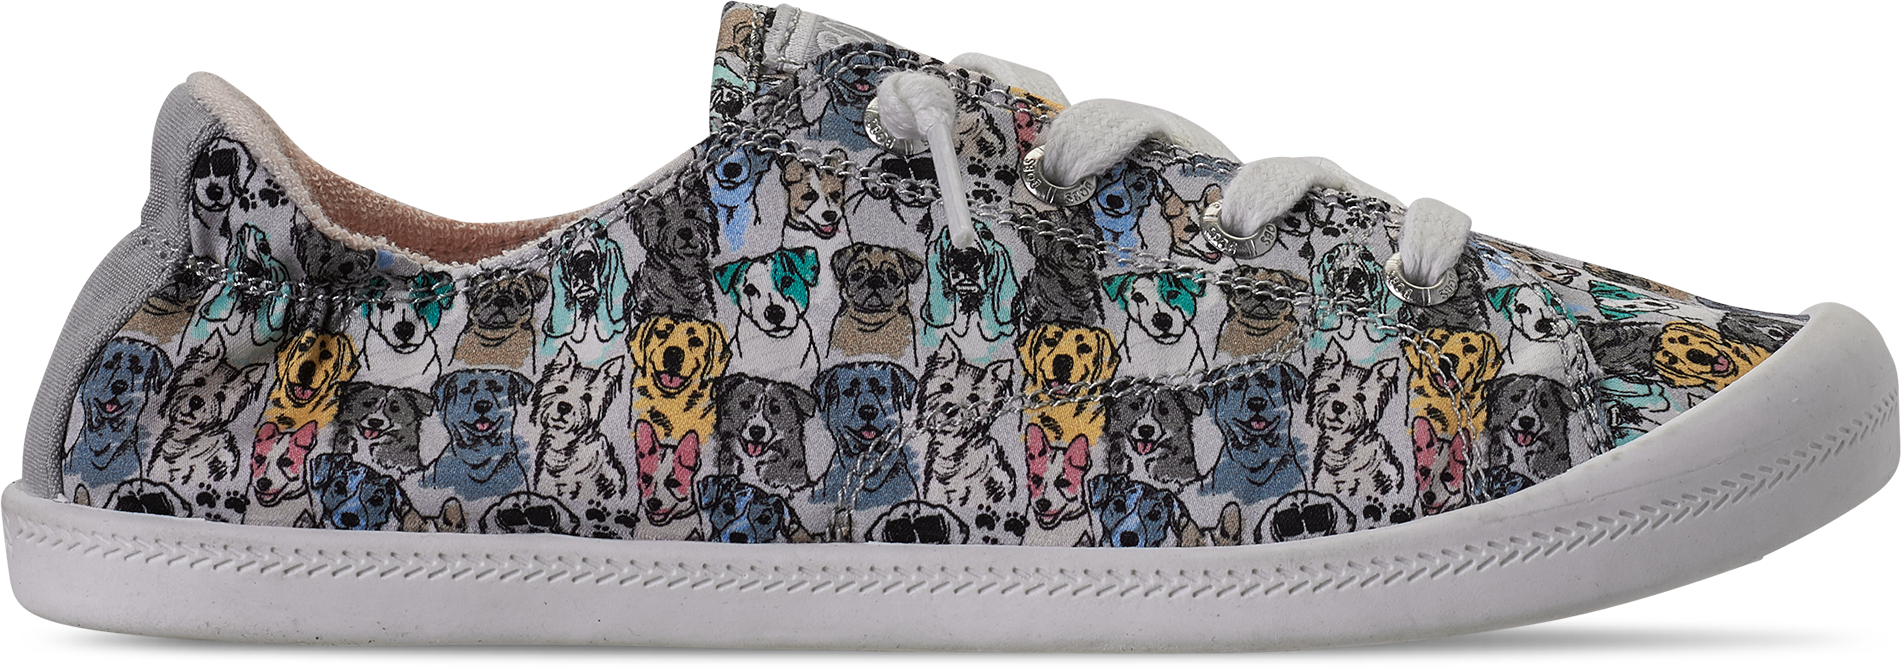 skechers bobs for dogs shoes